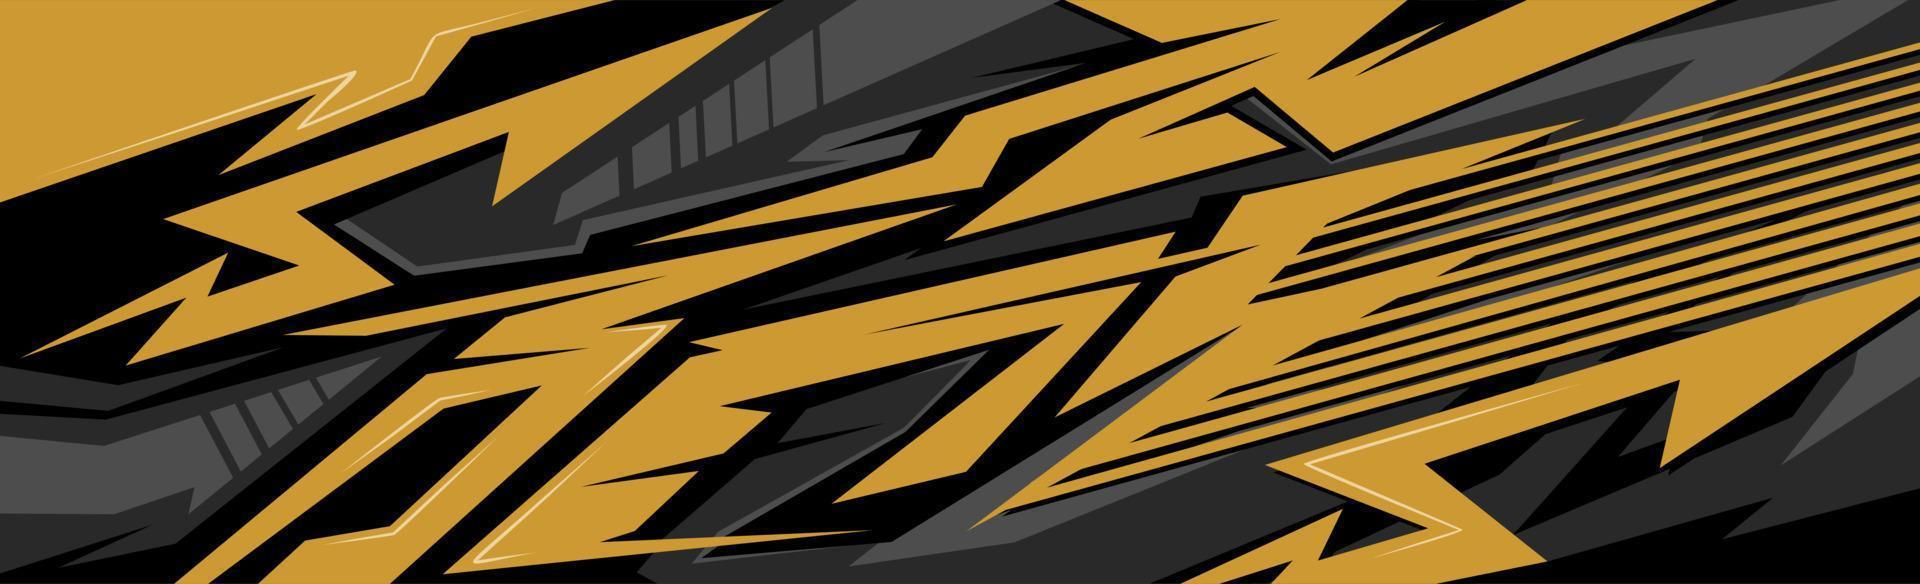 golden and black car decal wrap design vector. Graphic abstract stripe racing background kit designs for vehicle, race car, rally, adventure and livery vector